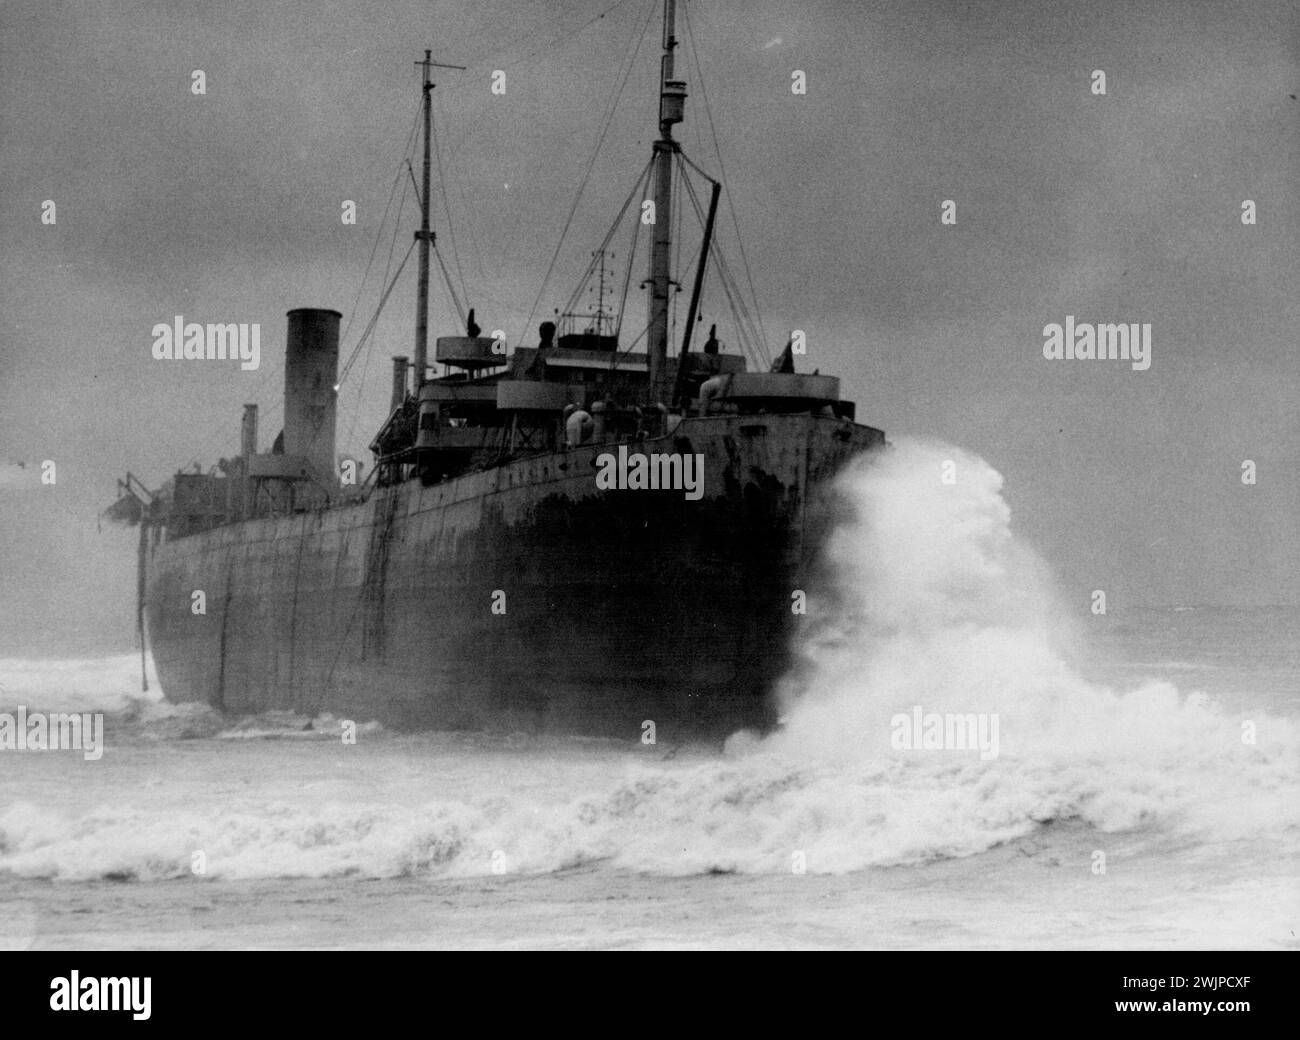 Five Sailors still remained aboard this American steamer, wrecked moments ago in a gale on the Australian coast, when this photo was taken. Eventually all hands were saved but four Australian Soldiers assisting in the rescue were drowned. November 15, 1943. (Photo by Baden Herbertson Mullaney/Fairfax Media) Stock Photo